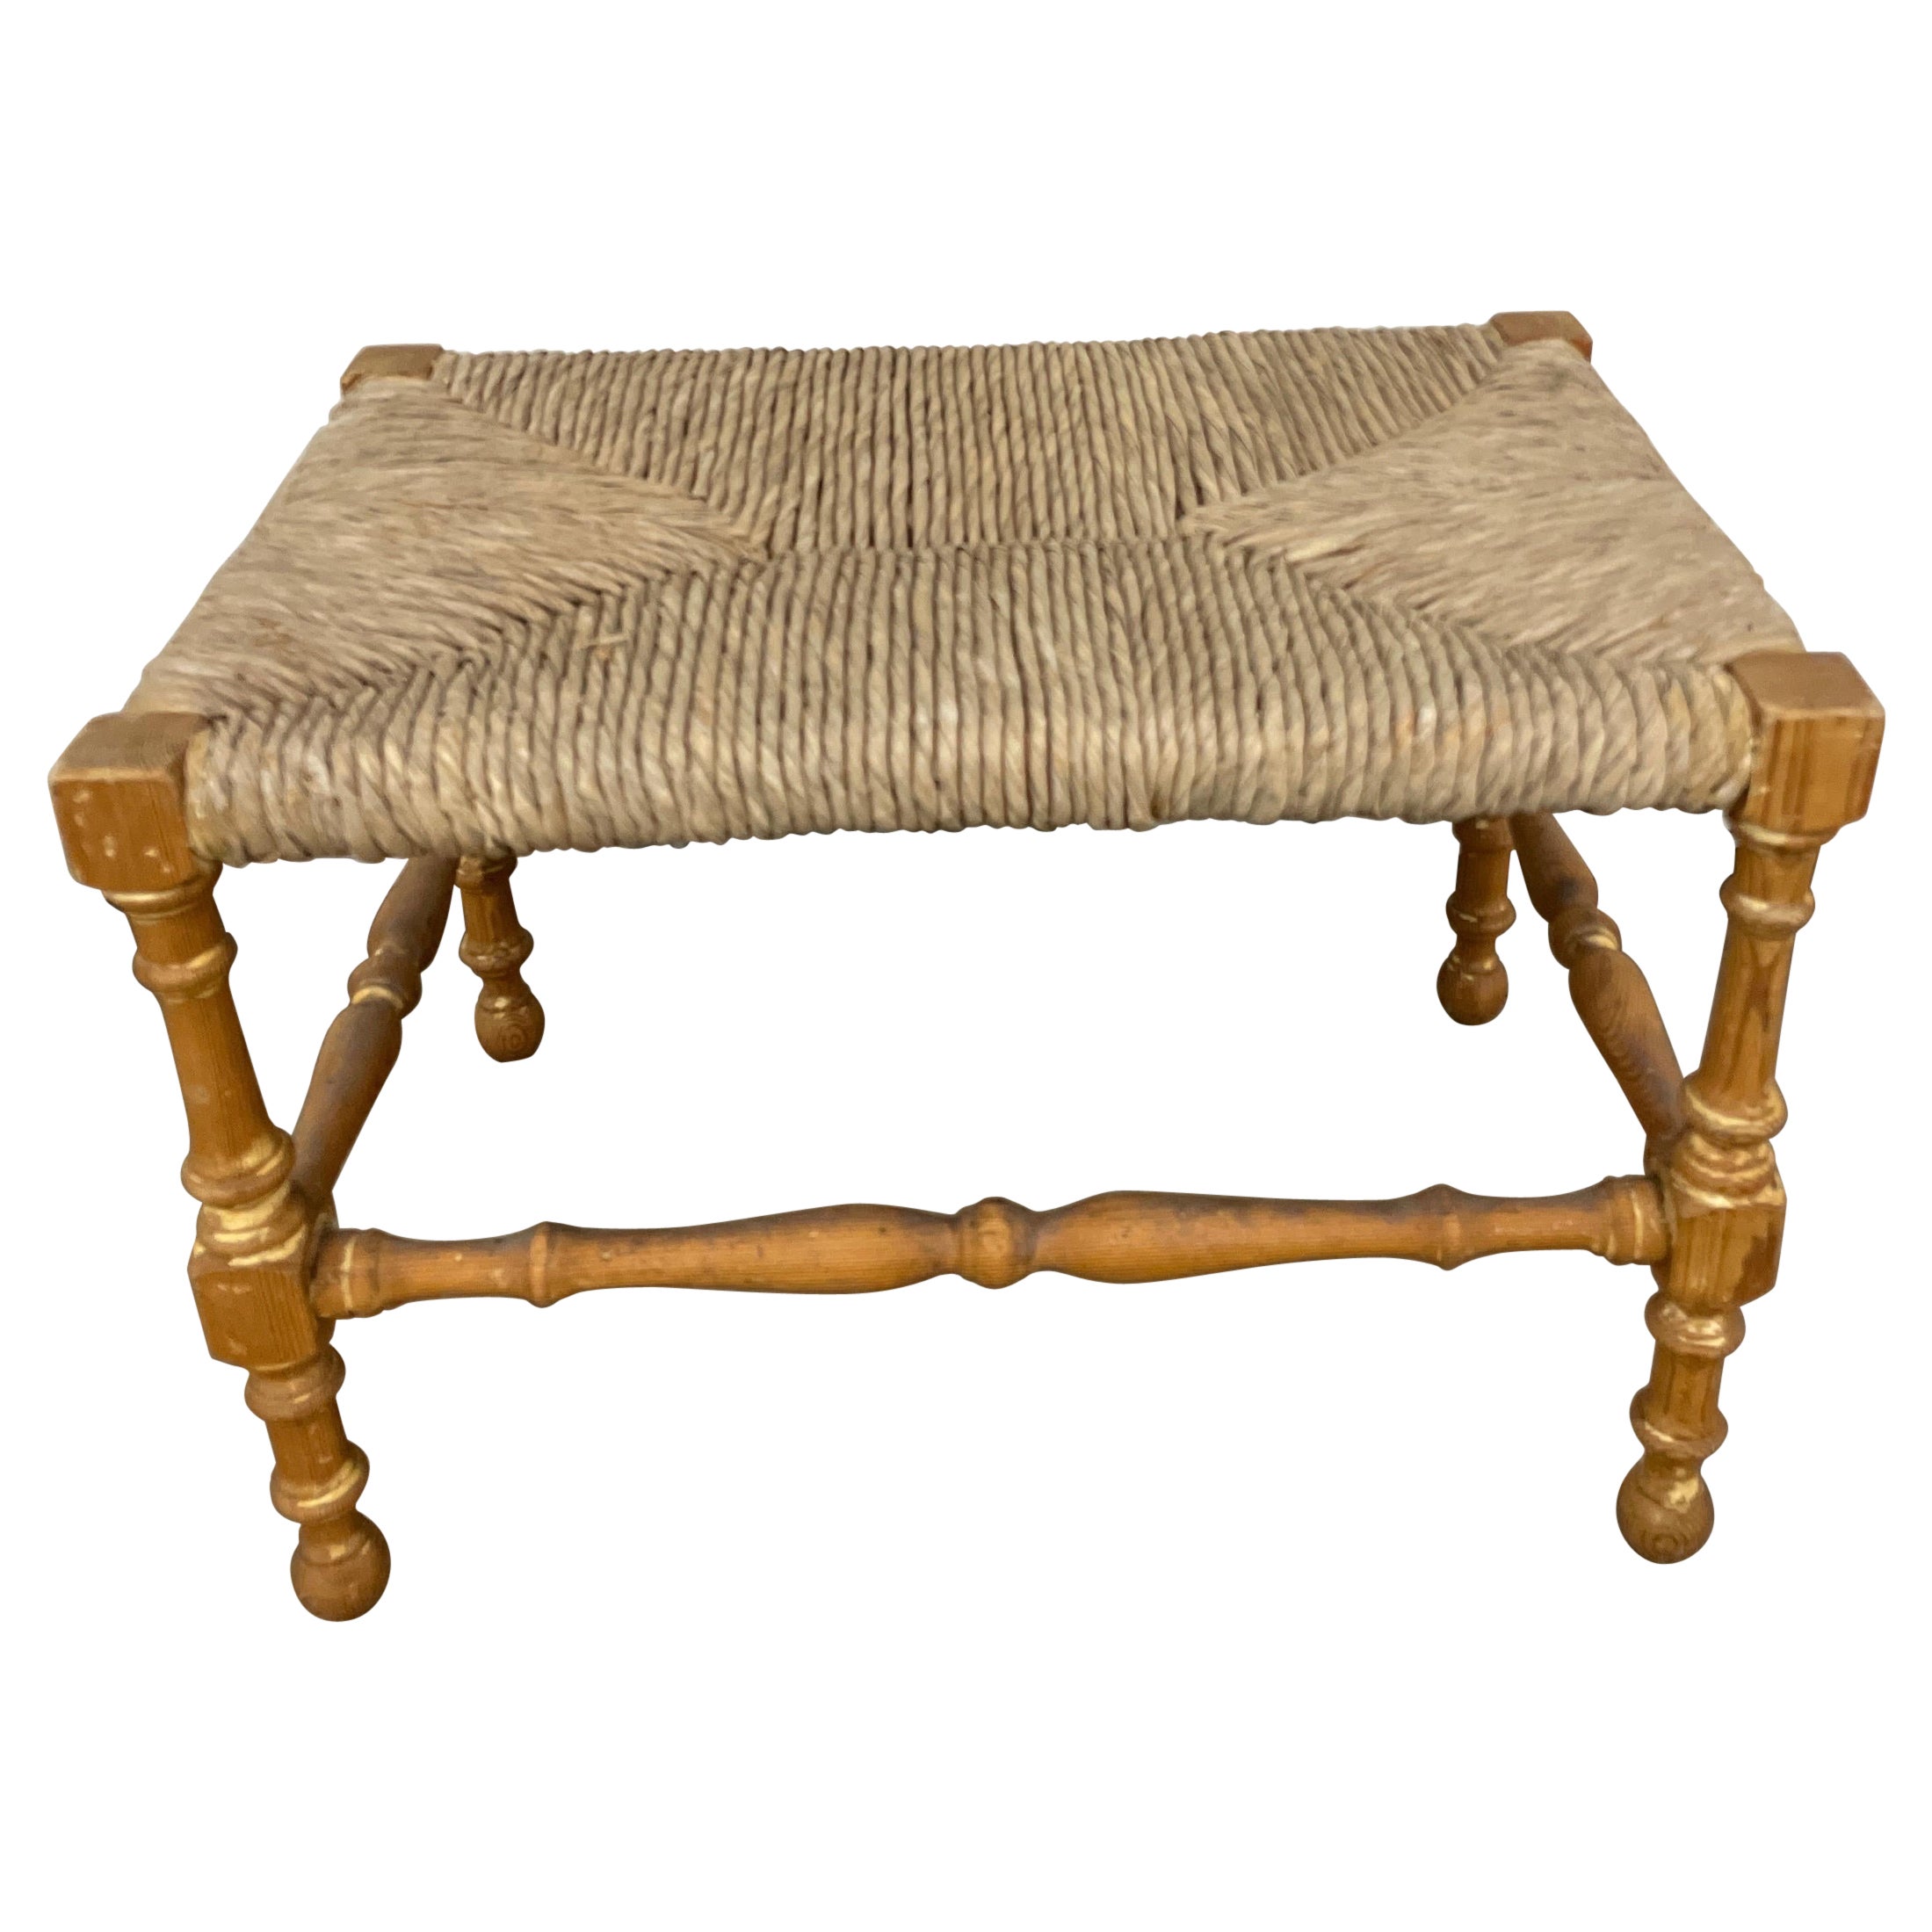 Vintage Country French Rush Seat Stool / Bench For Sale